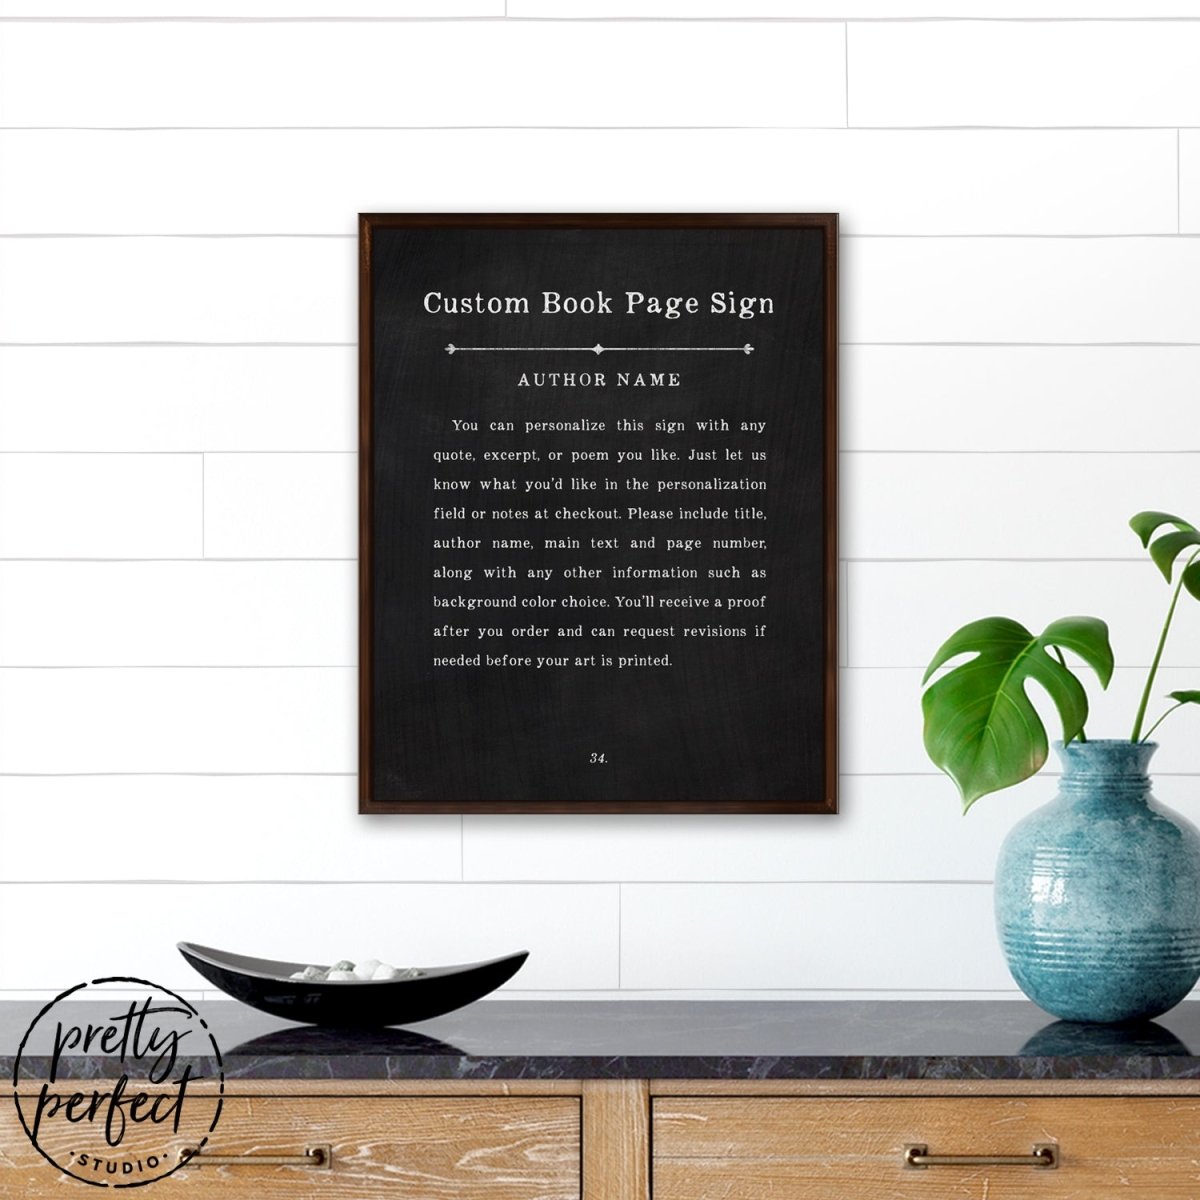 Custom Book Page Sign Above Entryway Table - Pretty Perfect Studio